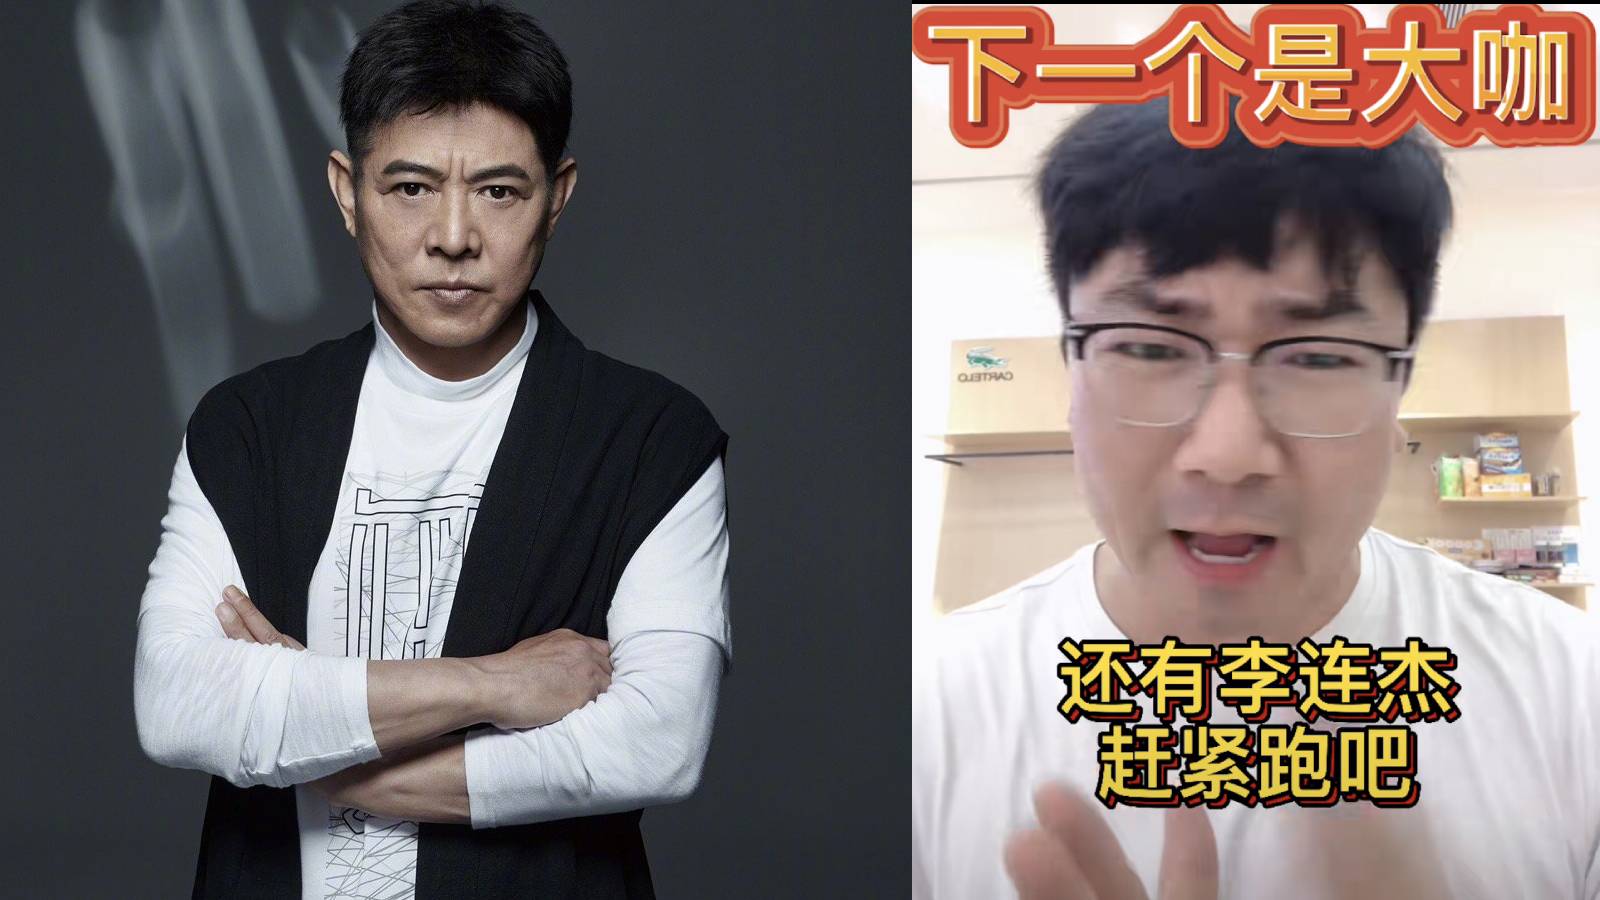 Jet Li Rumoured To Be Next Star In China To Get Cancelled; Chinese Director Warns Him To “Quickly Flee”